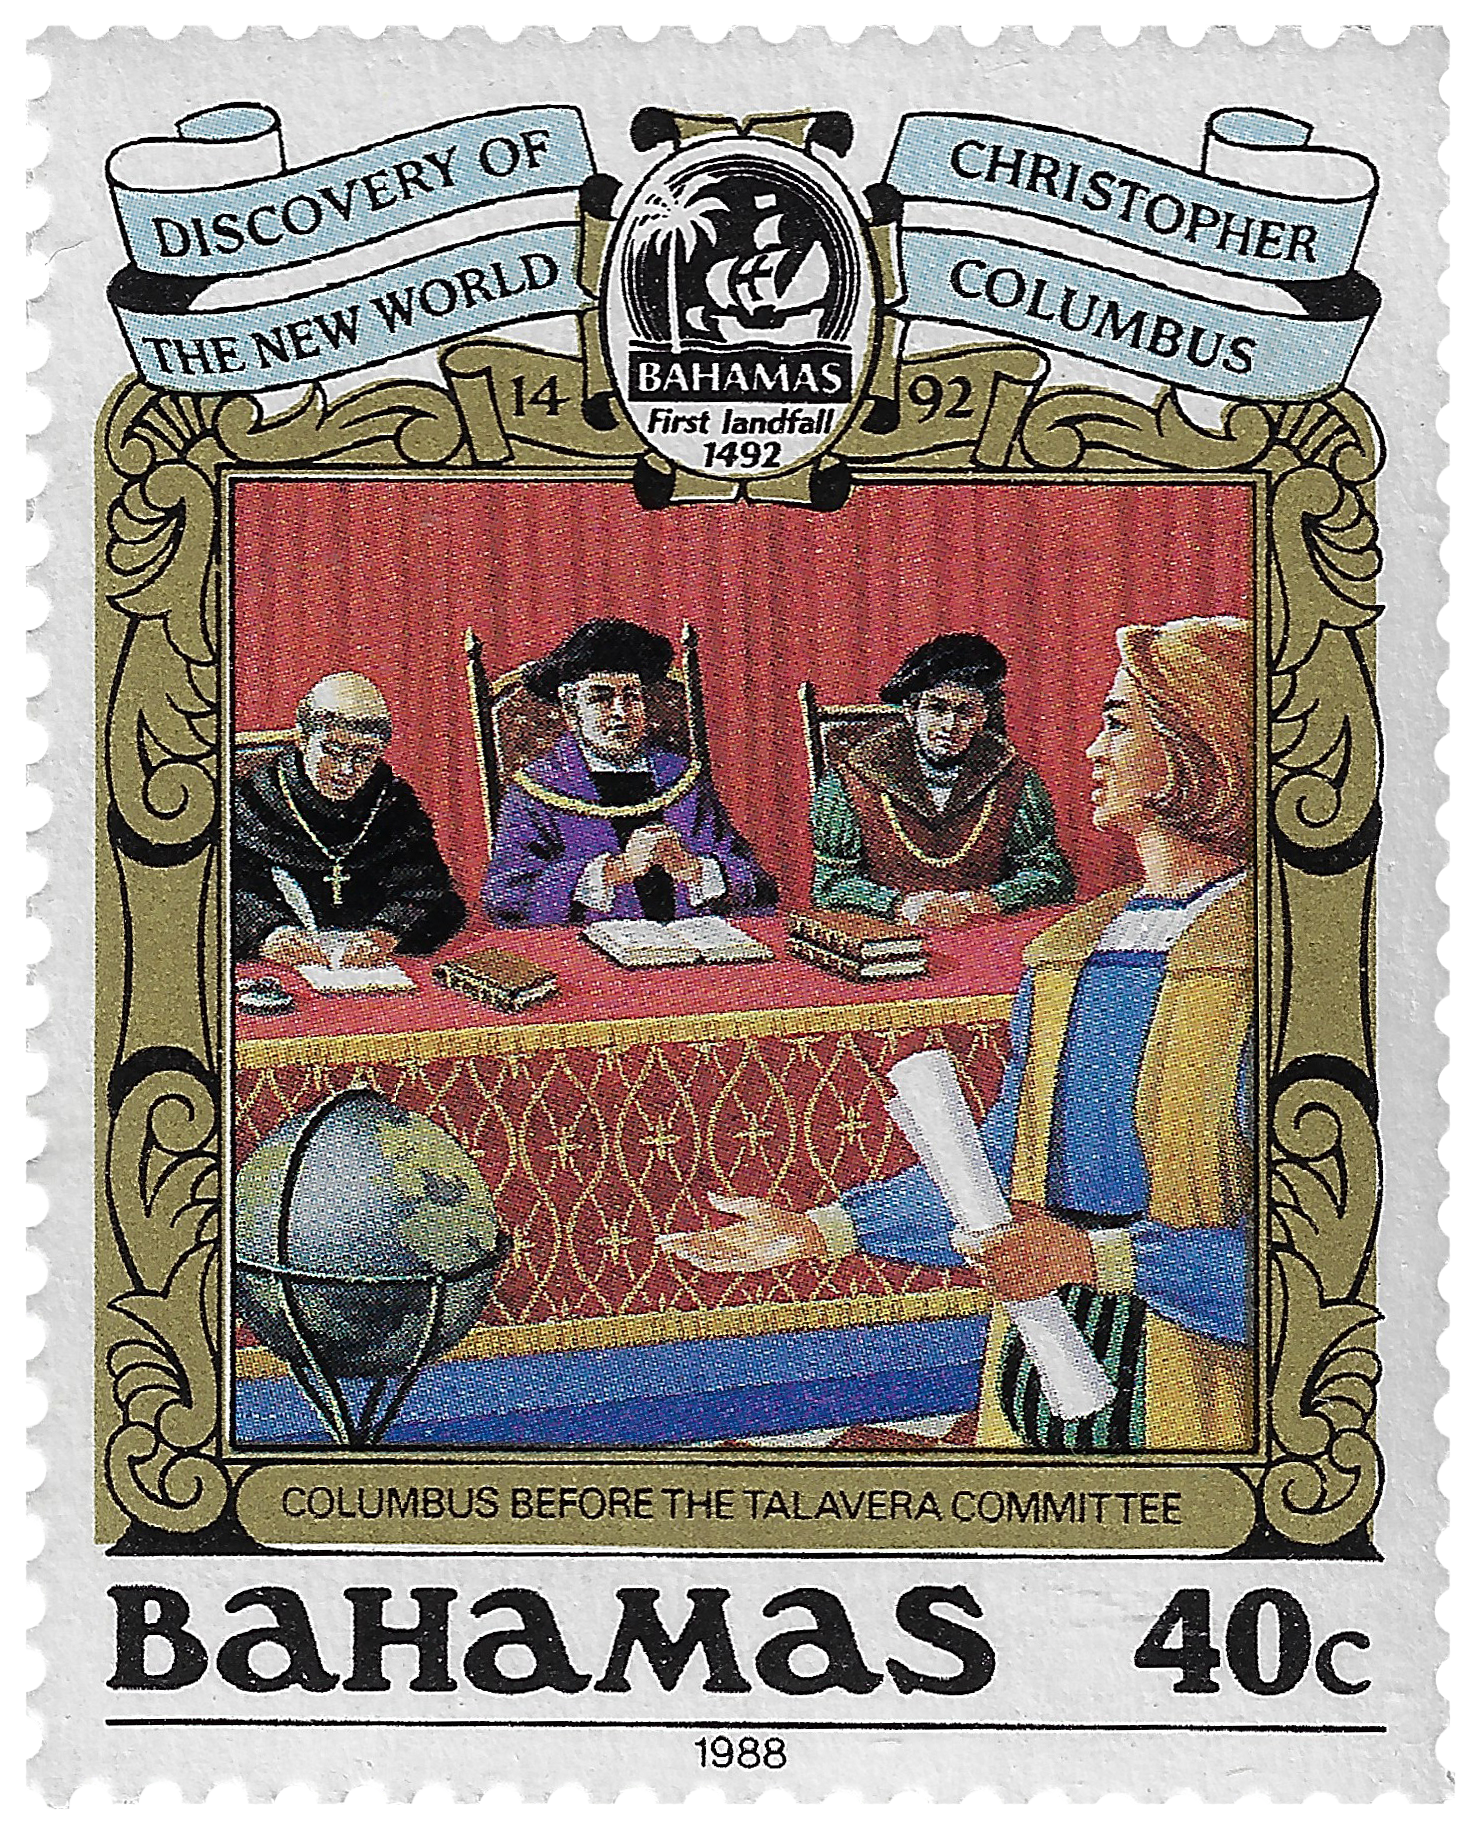 40c 1988, Discovery of the New World, Christopher Columbus, Columbus Before the Talavera Committee